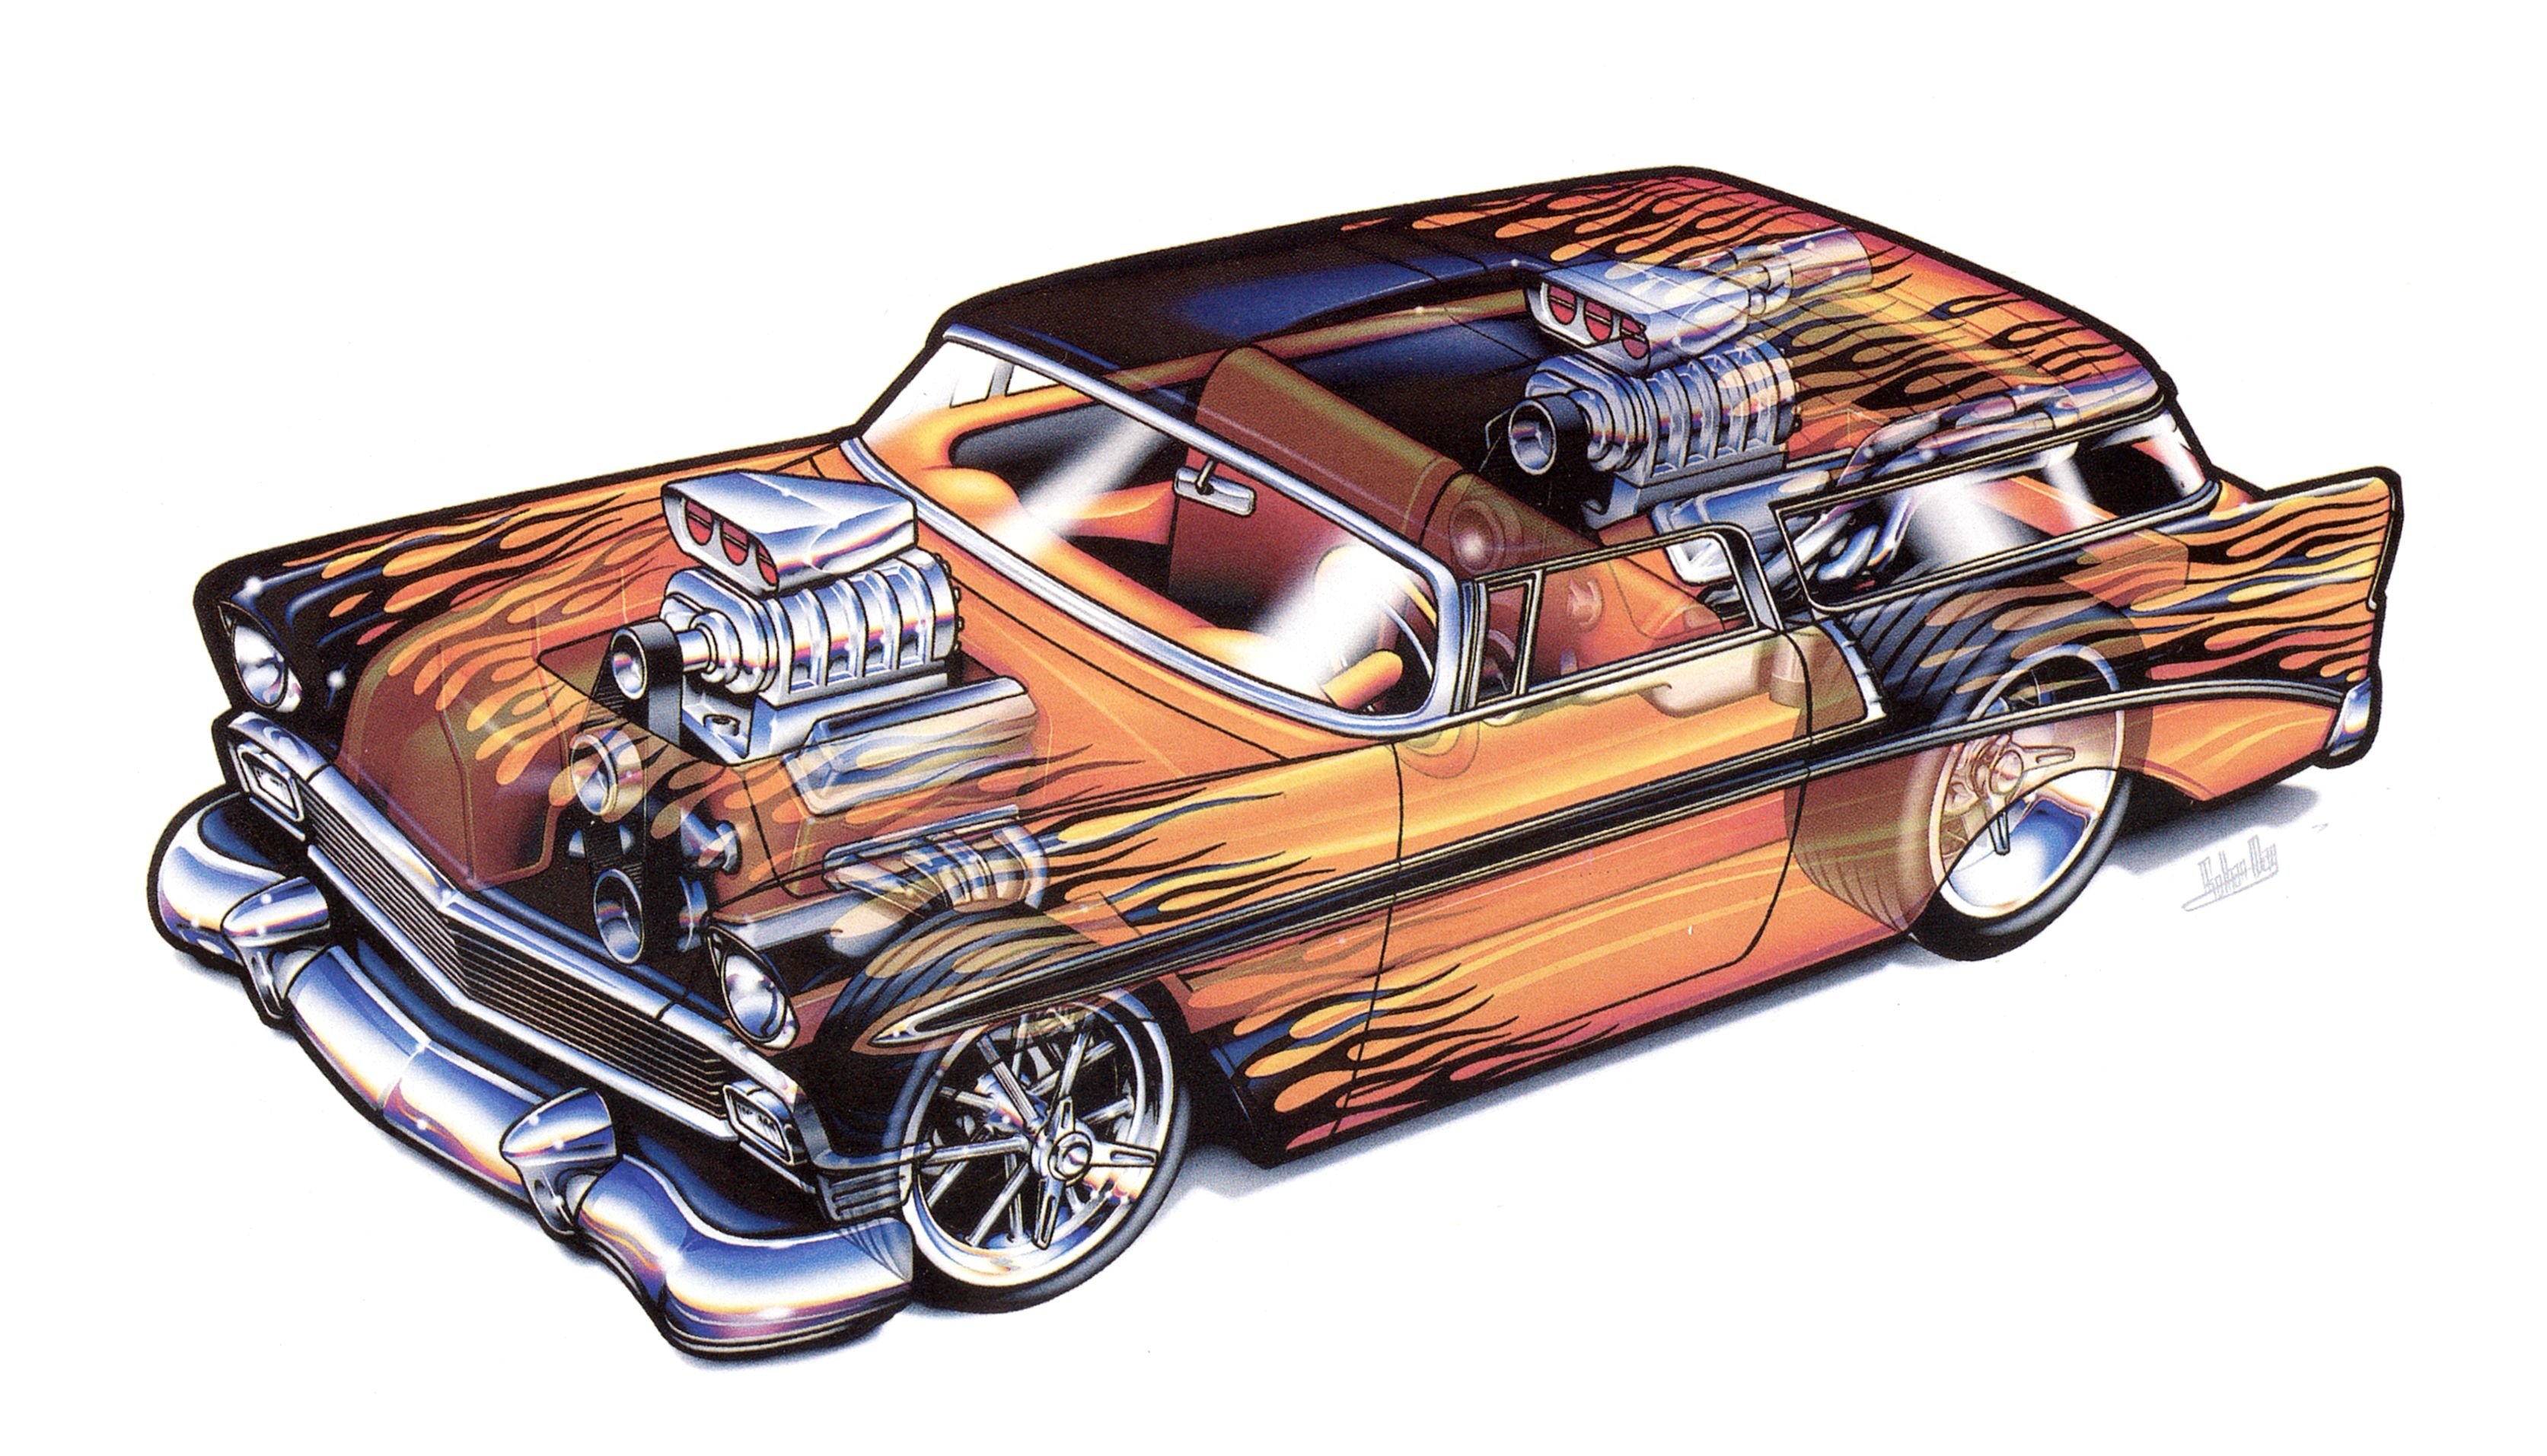 chevrolet, Nomad, 1956, Technical, Cars, Cutaway Wallpaper